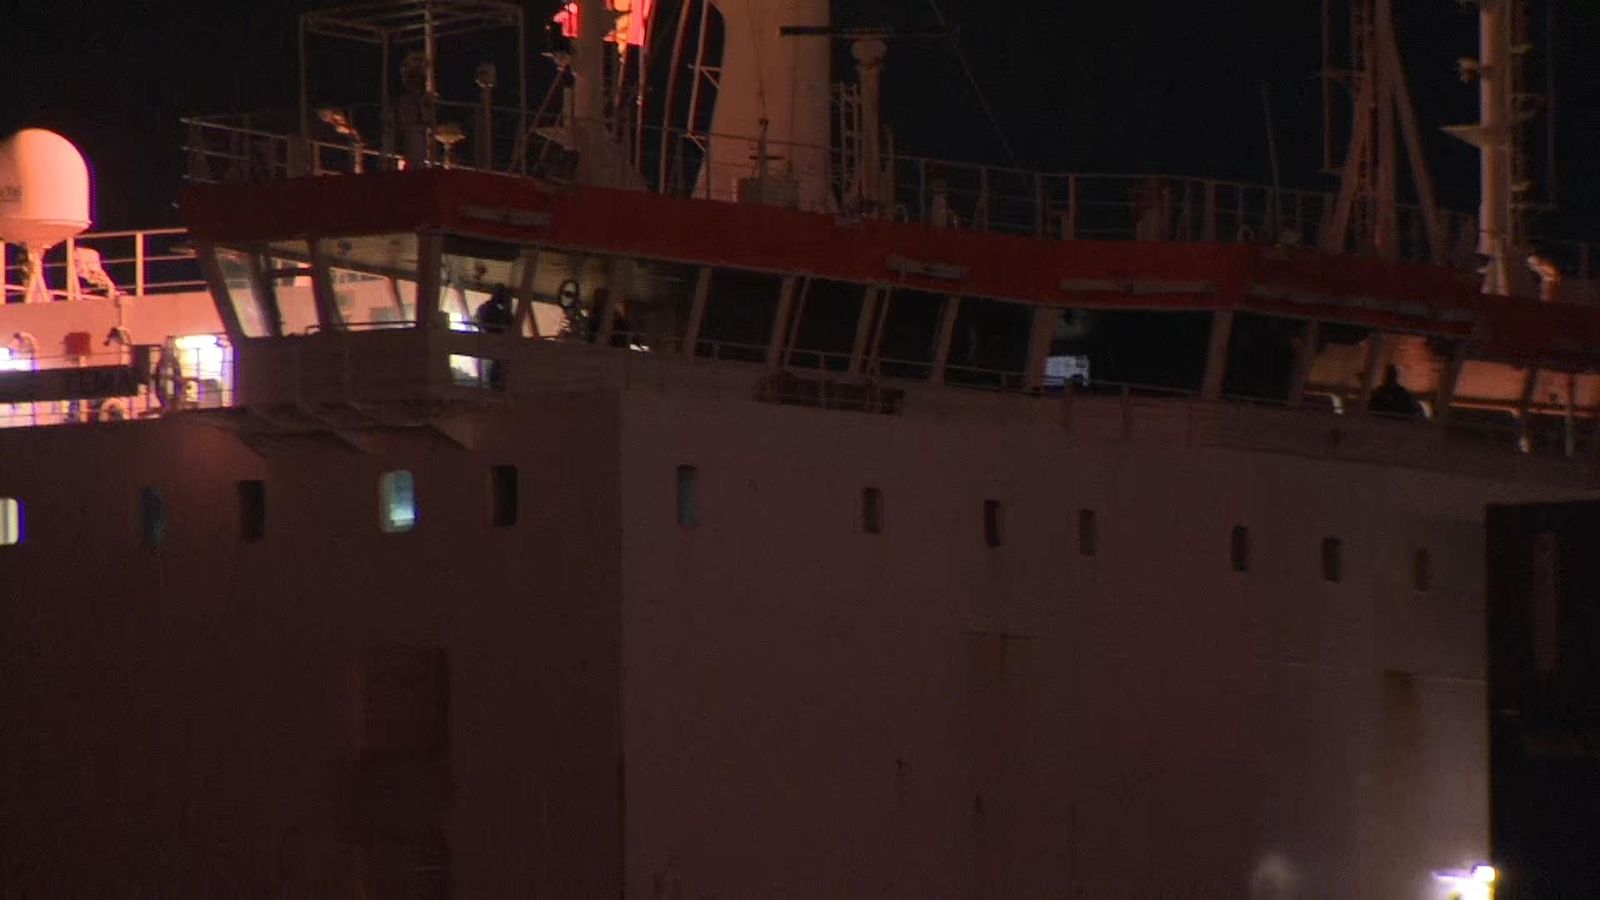 Special forces retake cargo ship after migrants threatened staff | UK ...